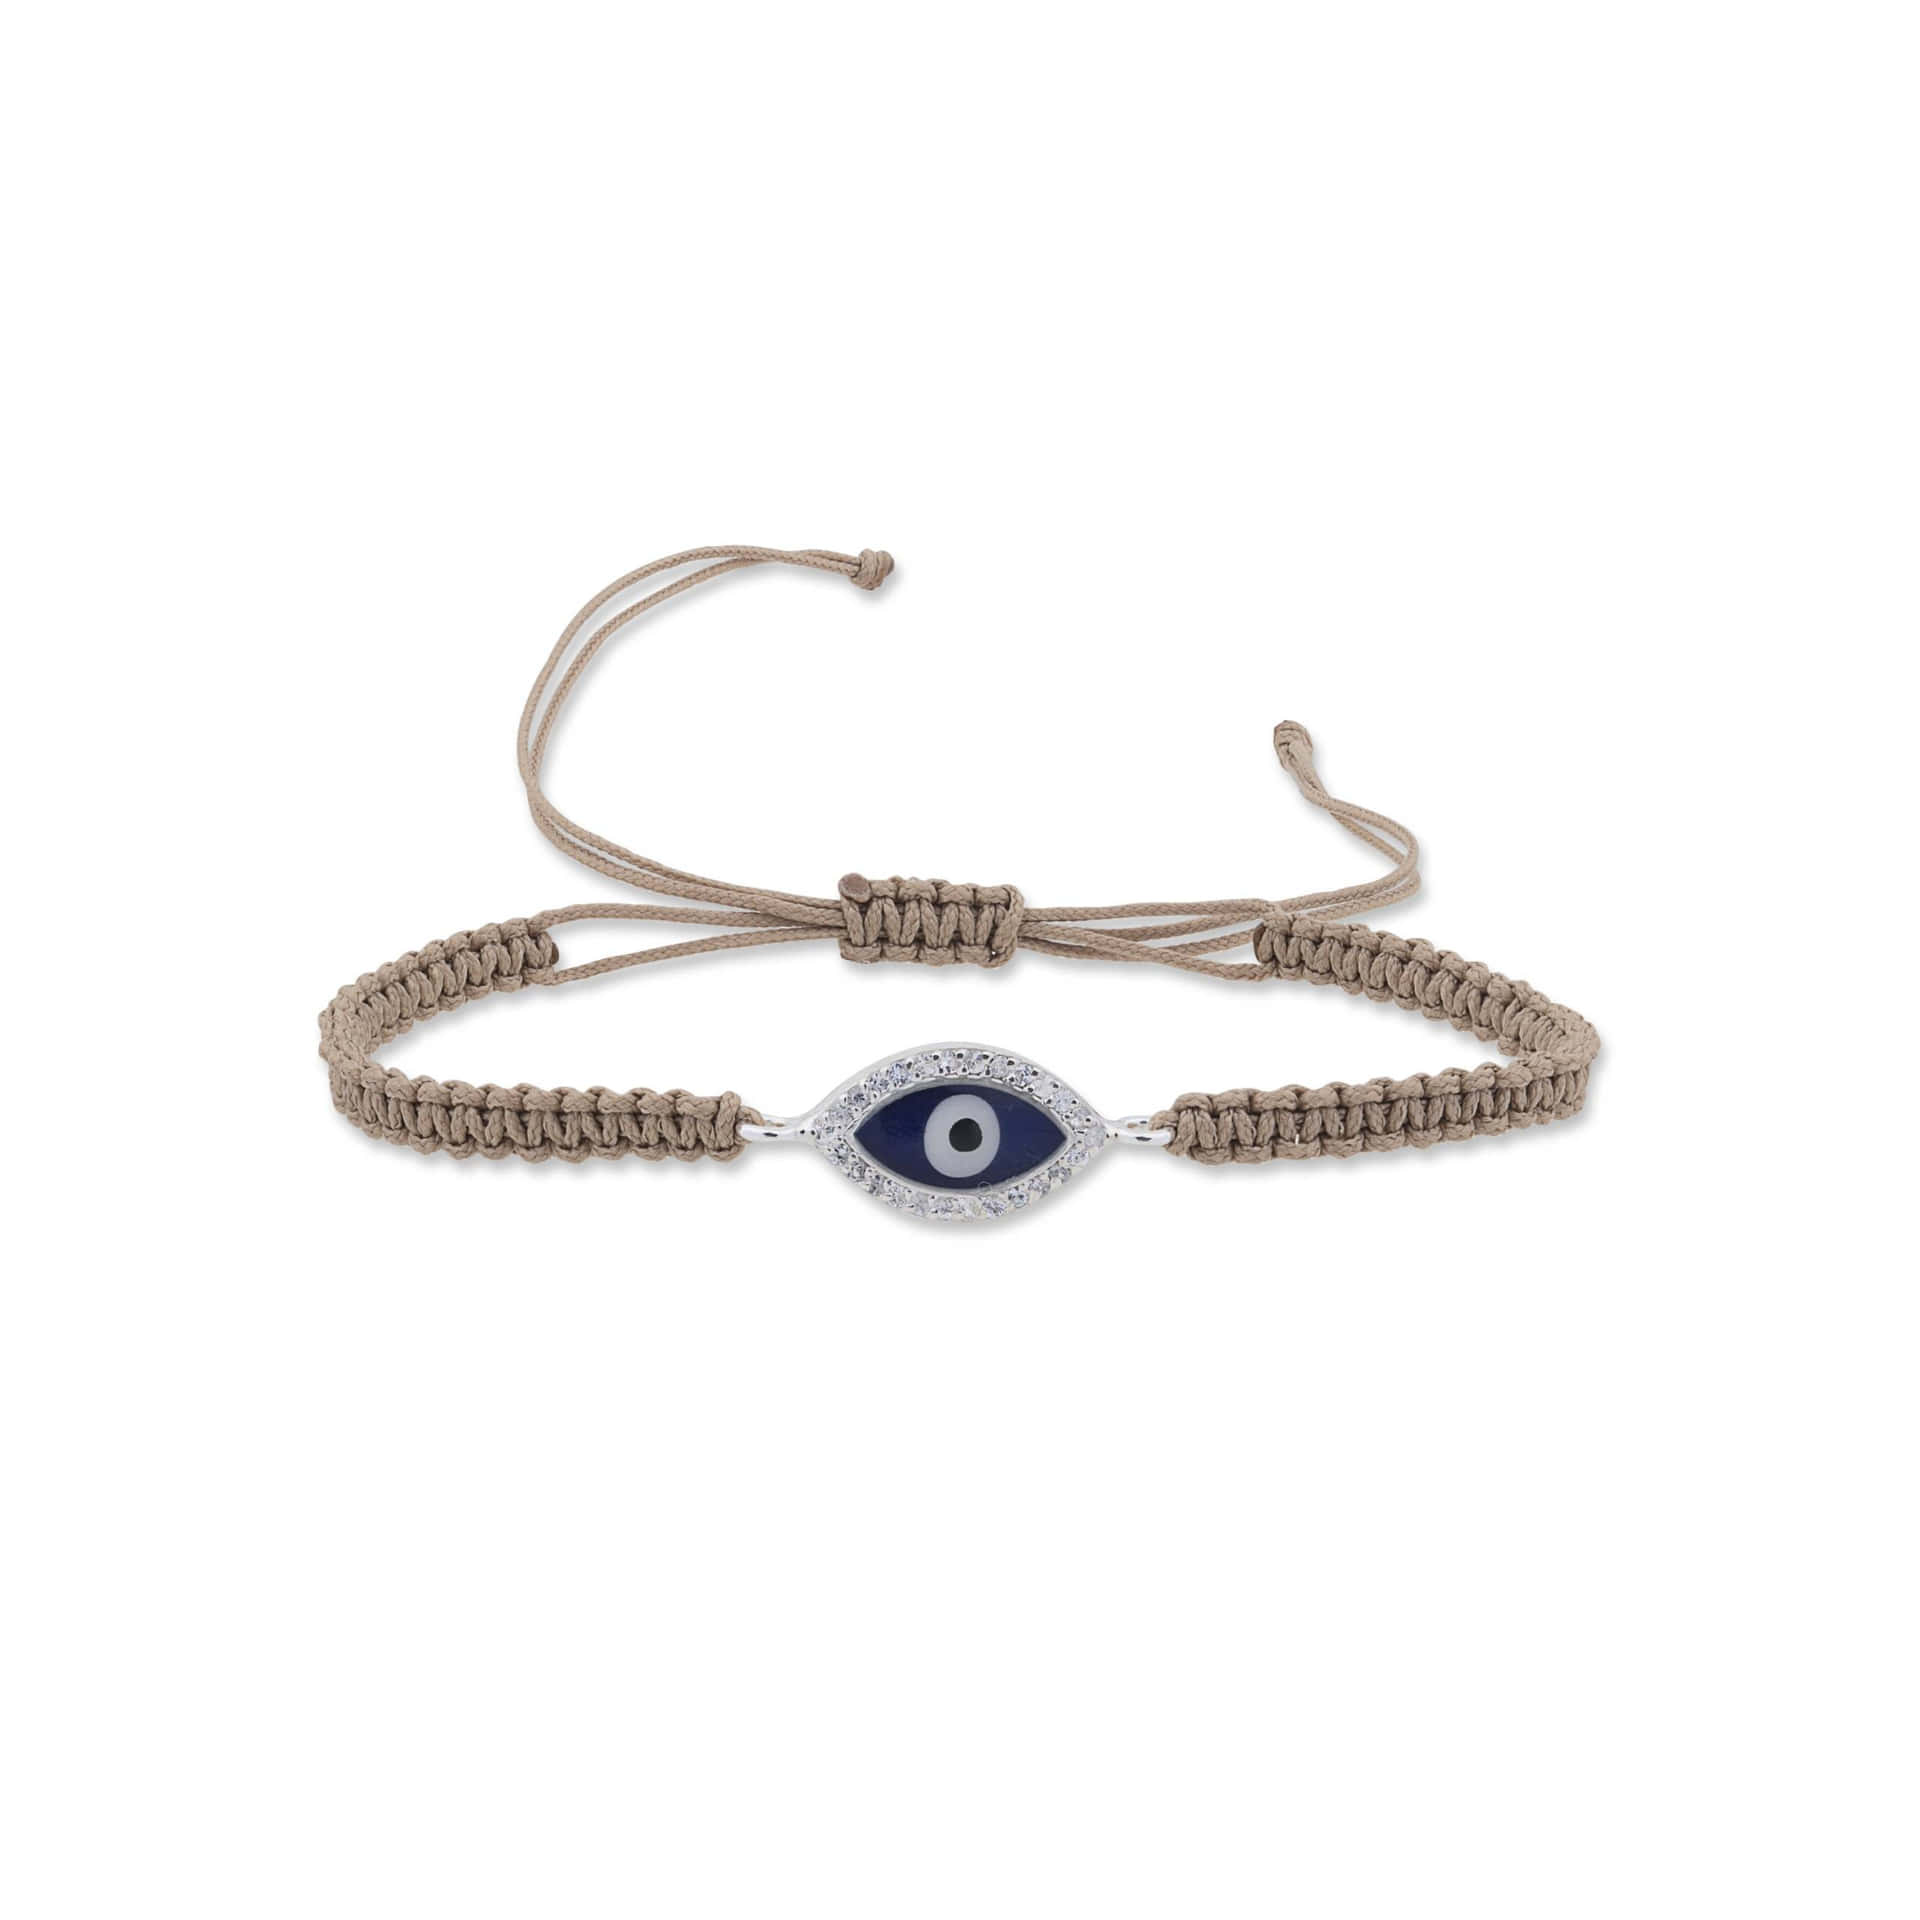 Intriguing Aesthetic of the Evil Eye